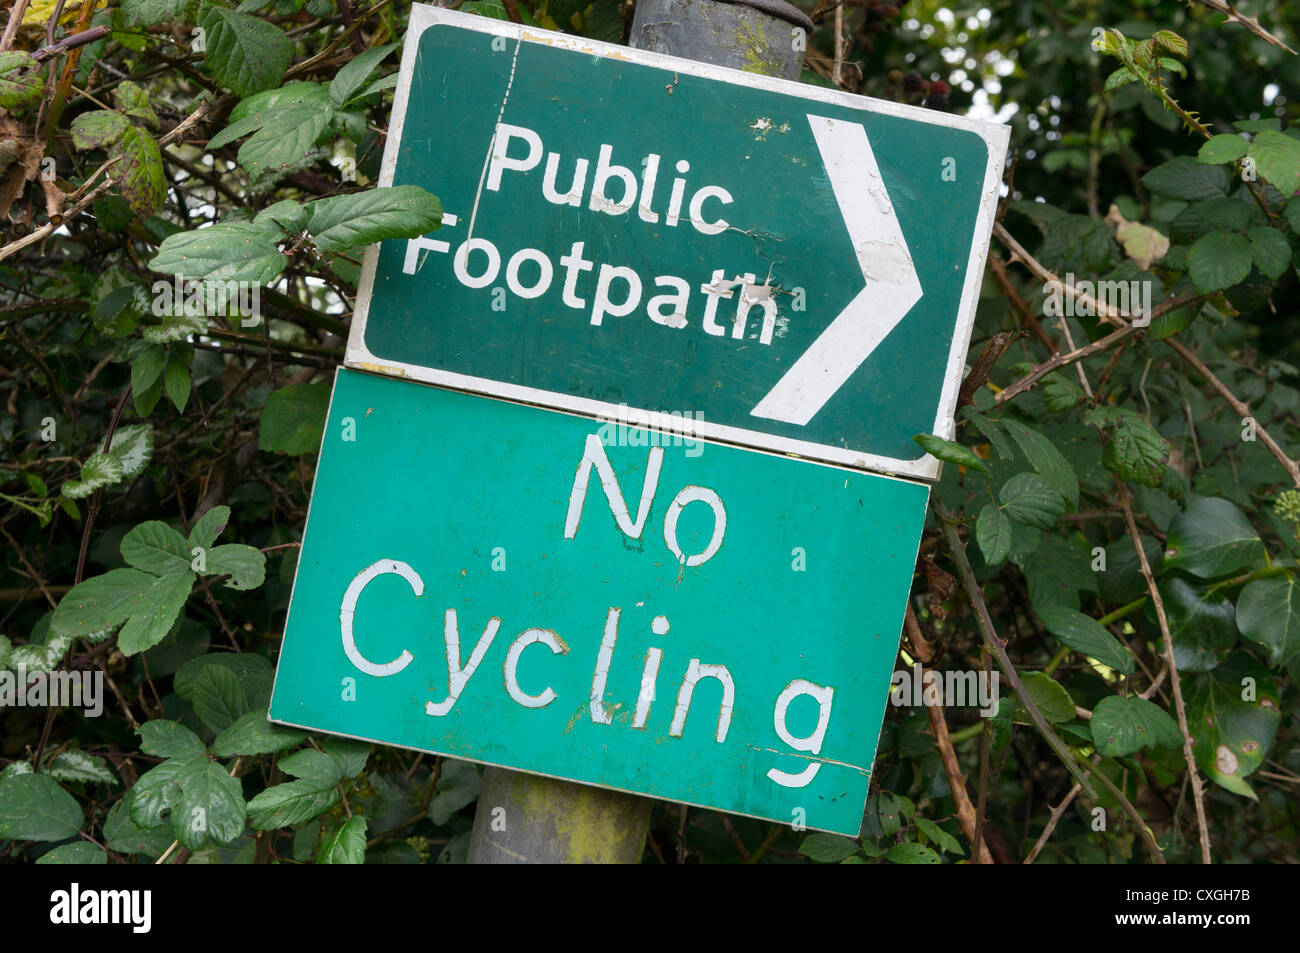 Public Footpath / No Cycling signs UK footpath Stock Photo